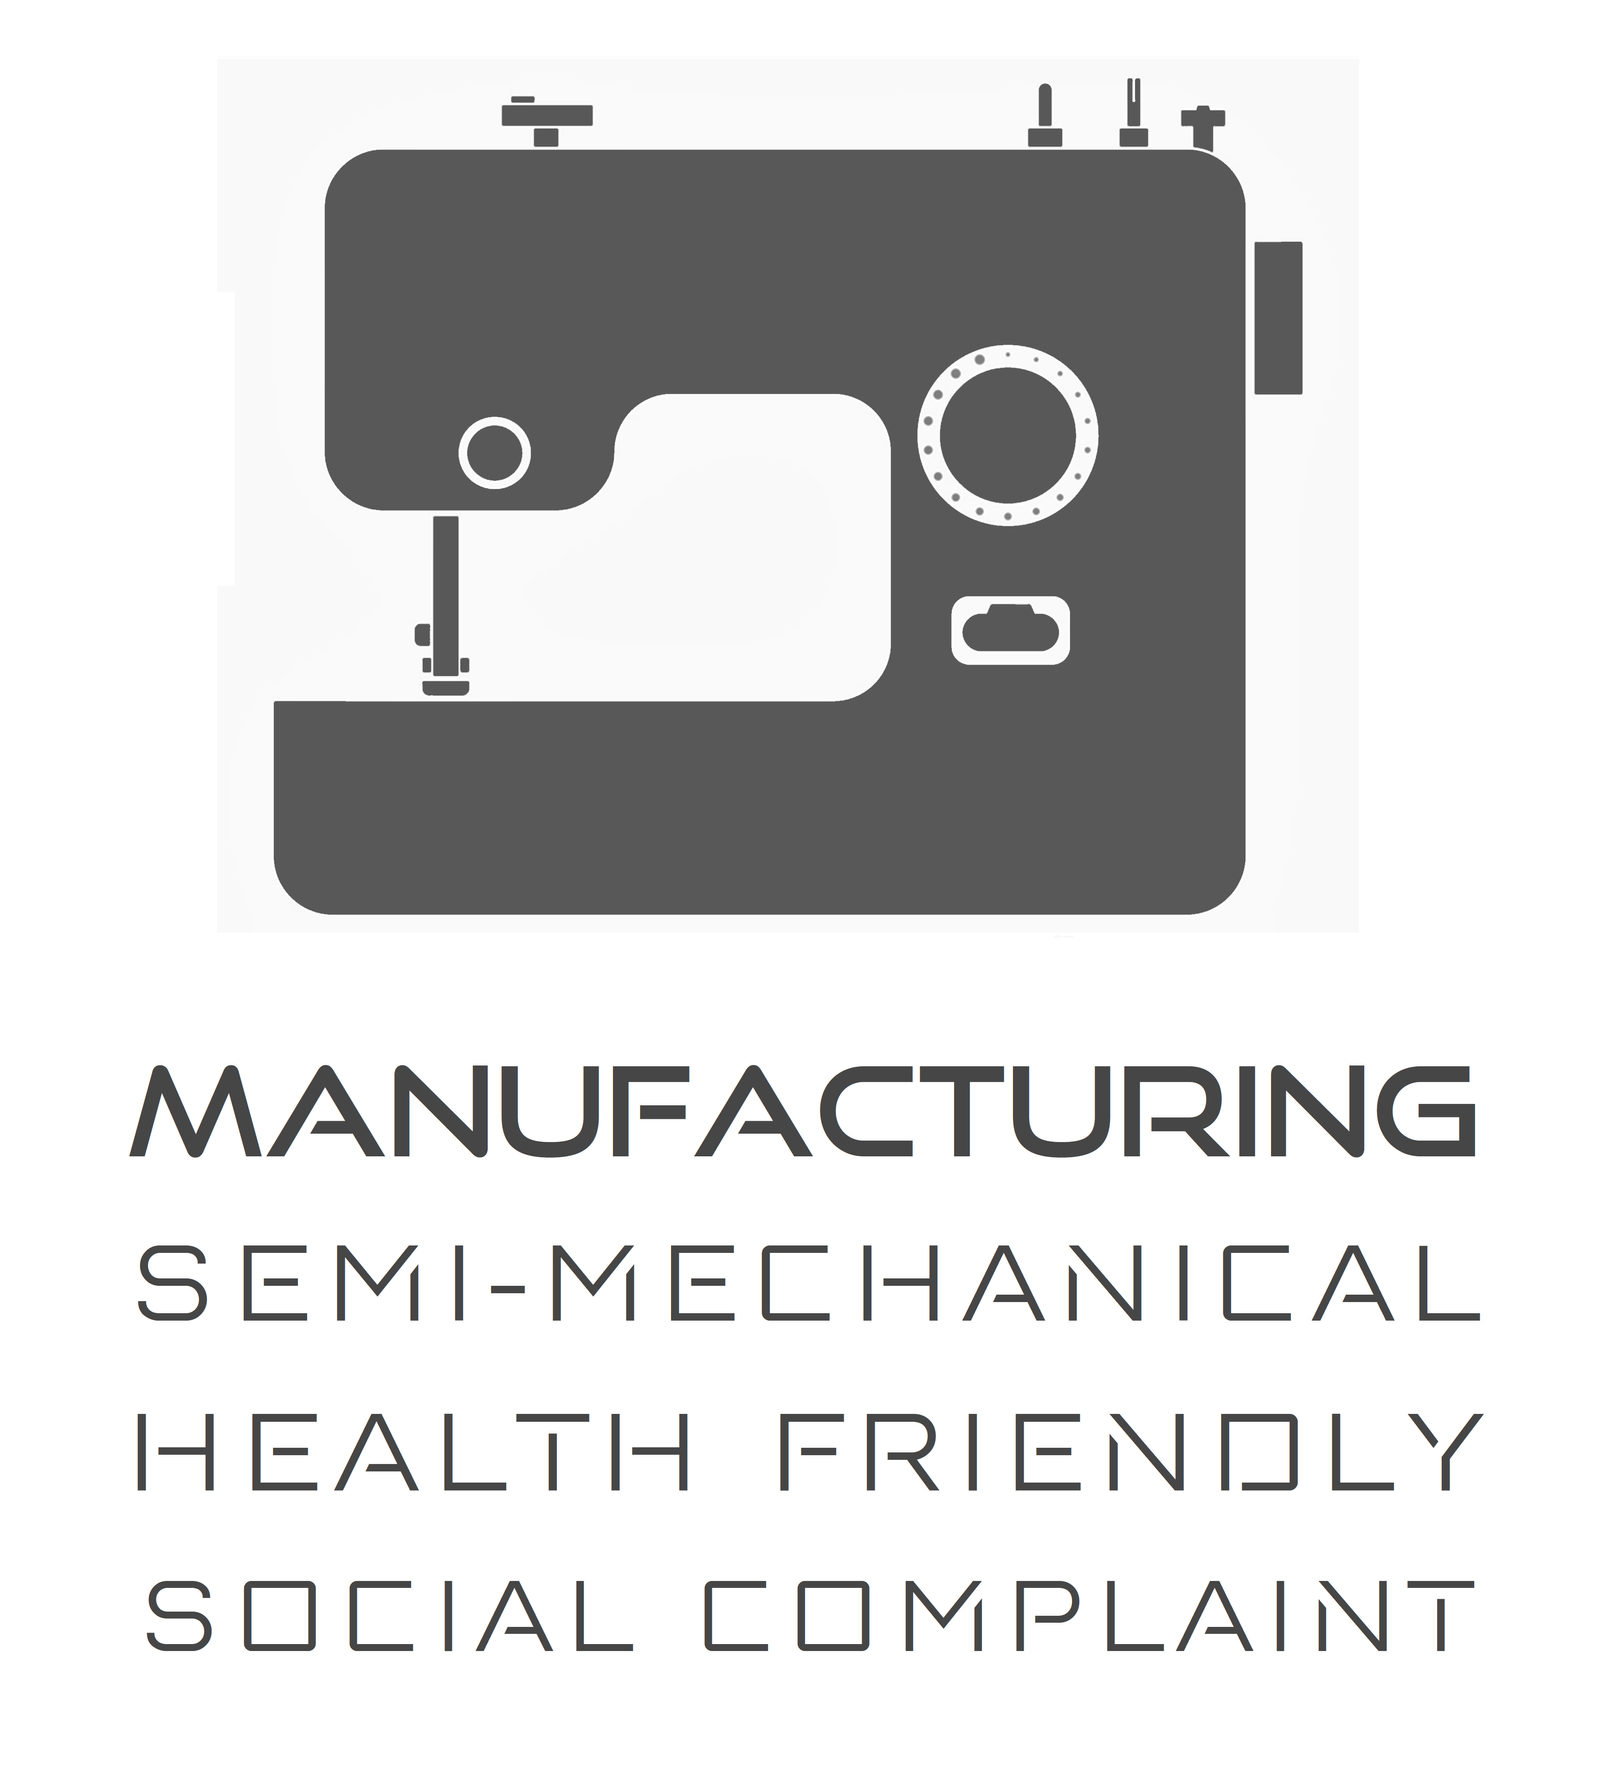 http://www.sscgrp.com/wp-content/uploads/2022/01/MANUFACTURING.png